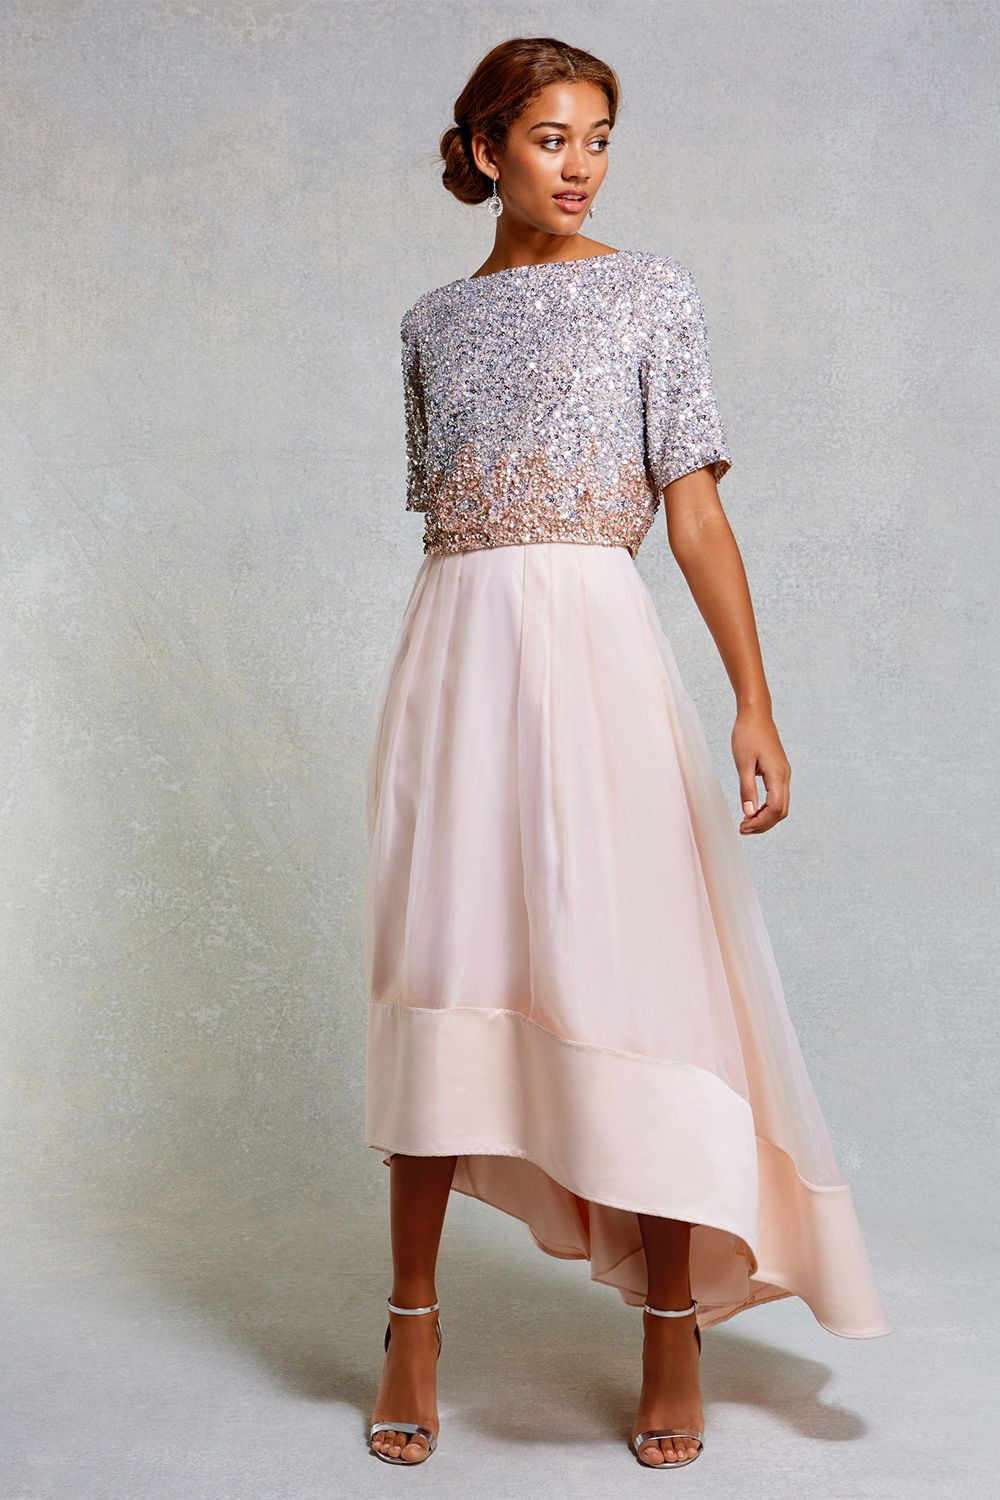 Two Piece Bridesmaid Outfits You'Ll Love  Registry Office